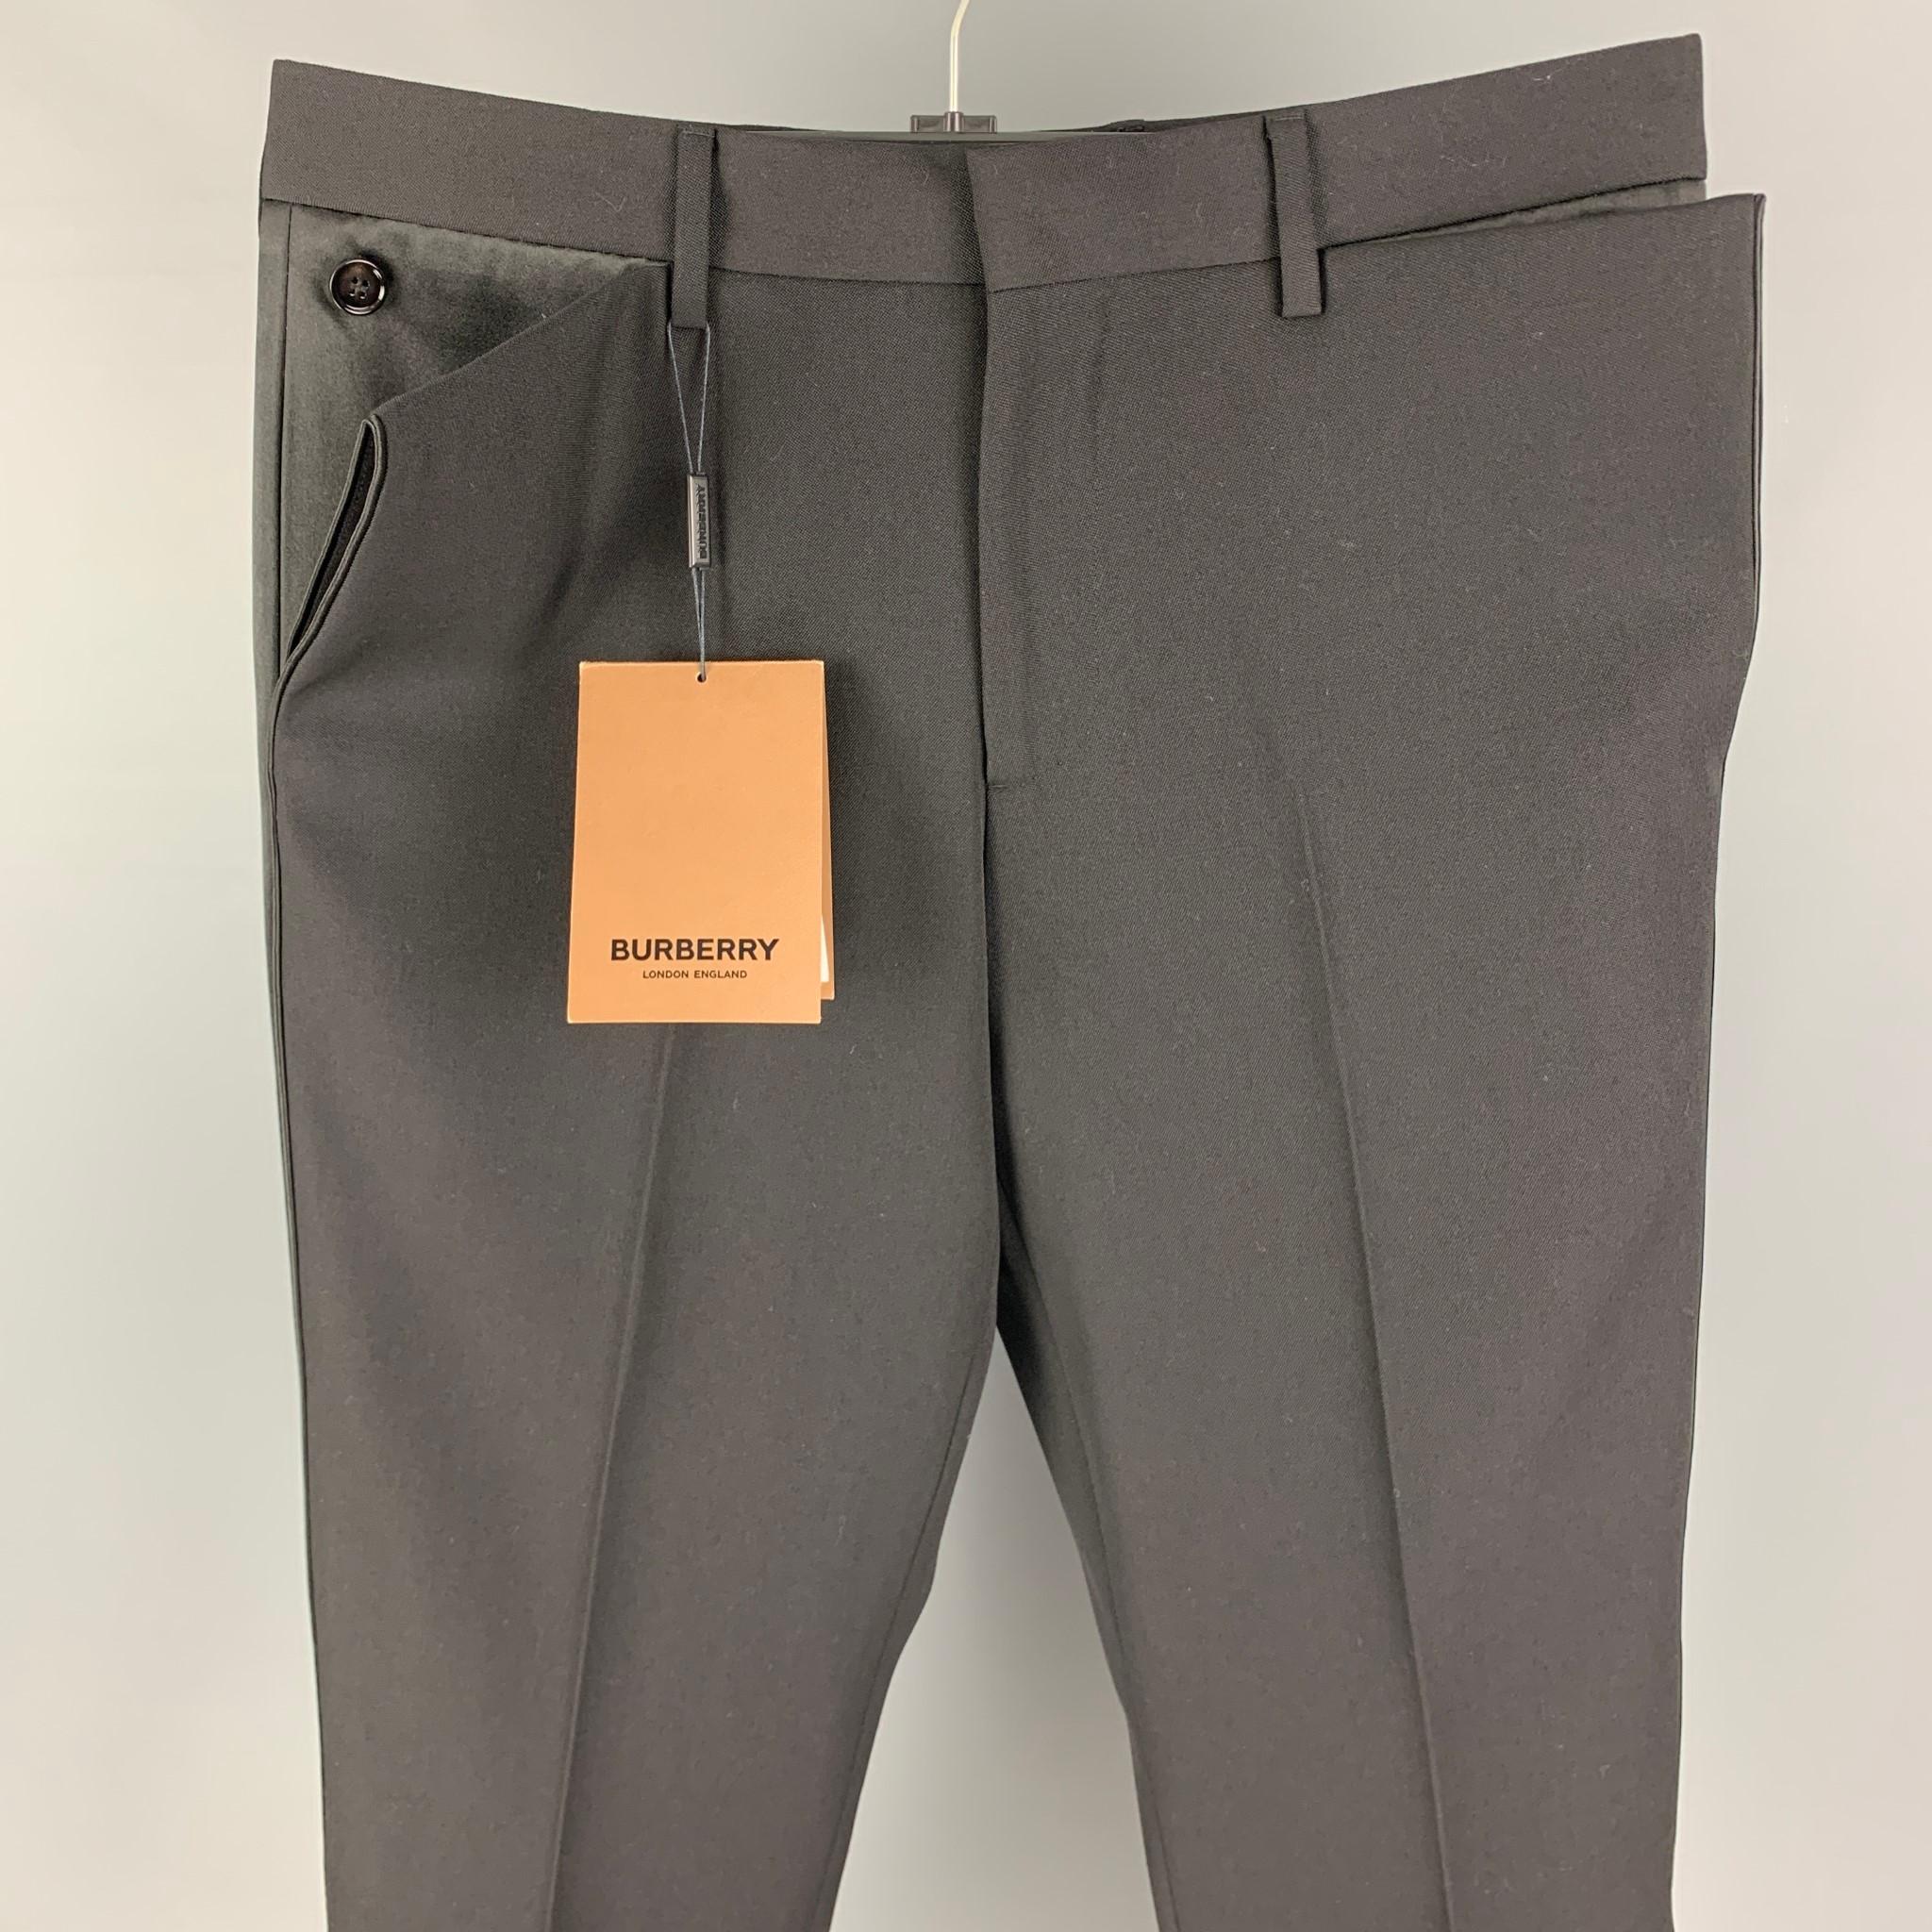 BURBERRY dress pants comes in a black wool featuring a flat front, buttoned details, front tab, and a zip fly closure. Made in Italy. 

New with tags.
Marked: 48
Original Retail Price: $990.00

Measurements:

Waist: 32 in.
Rise: 10 in.
Inseam: 32